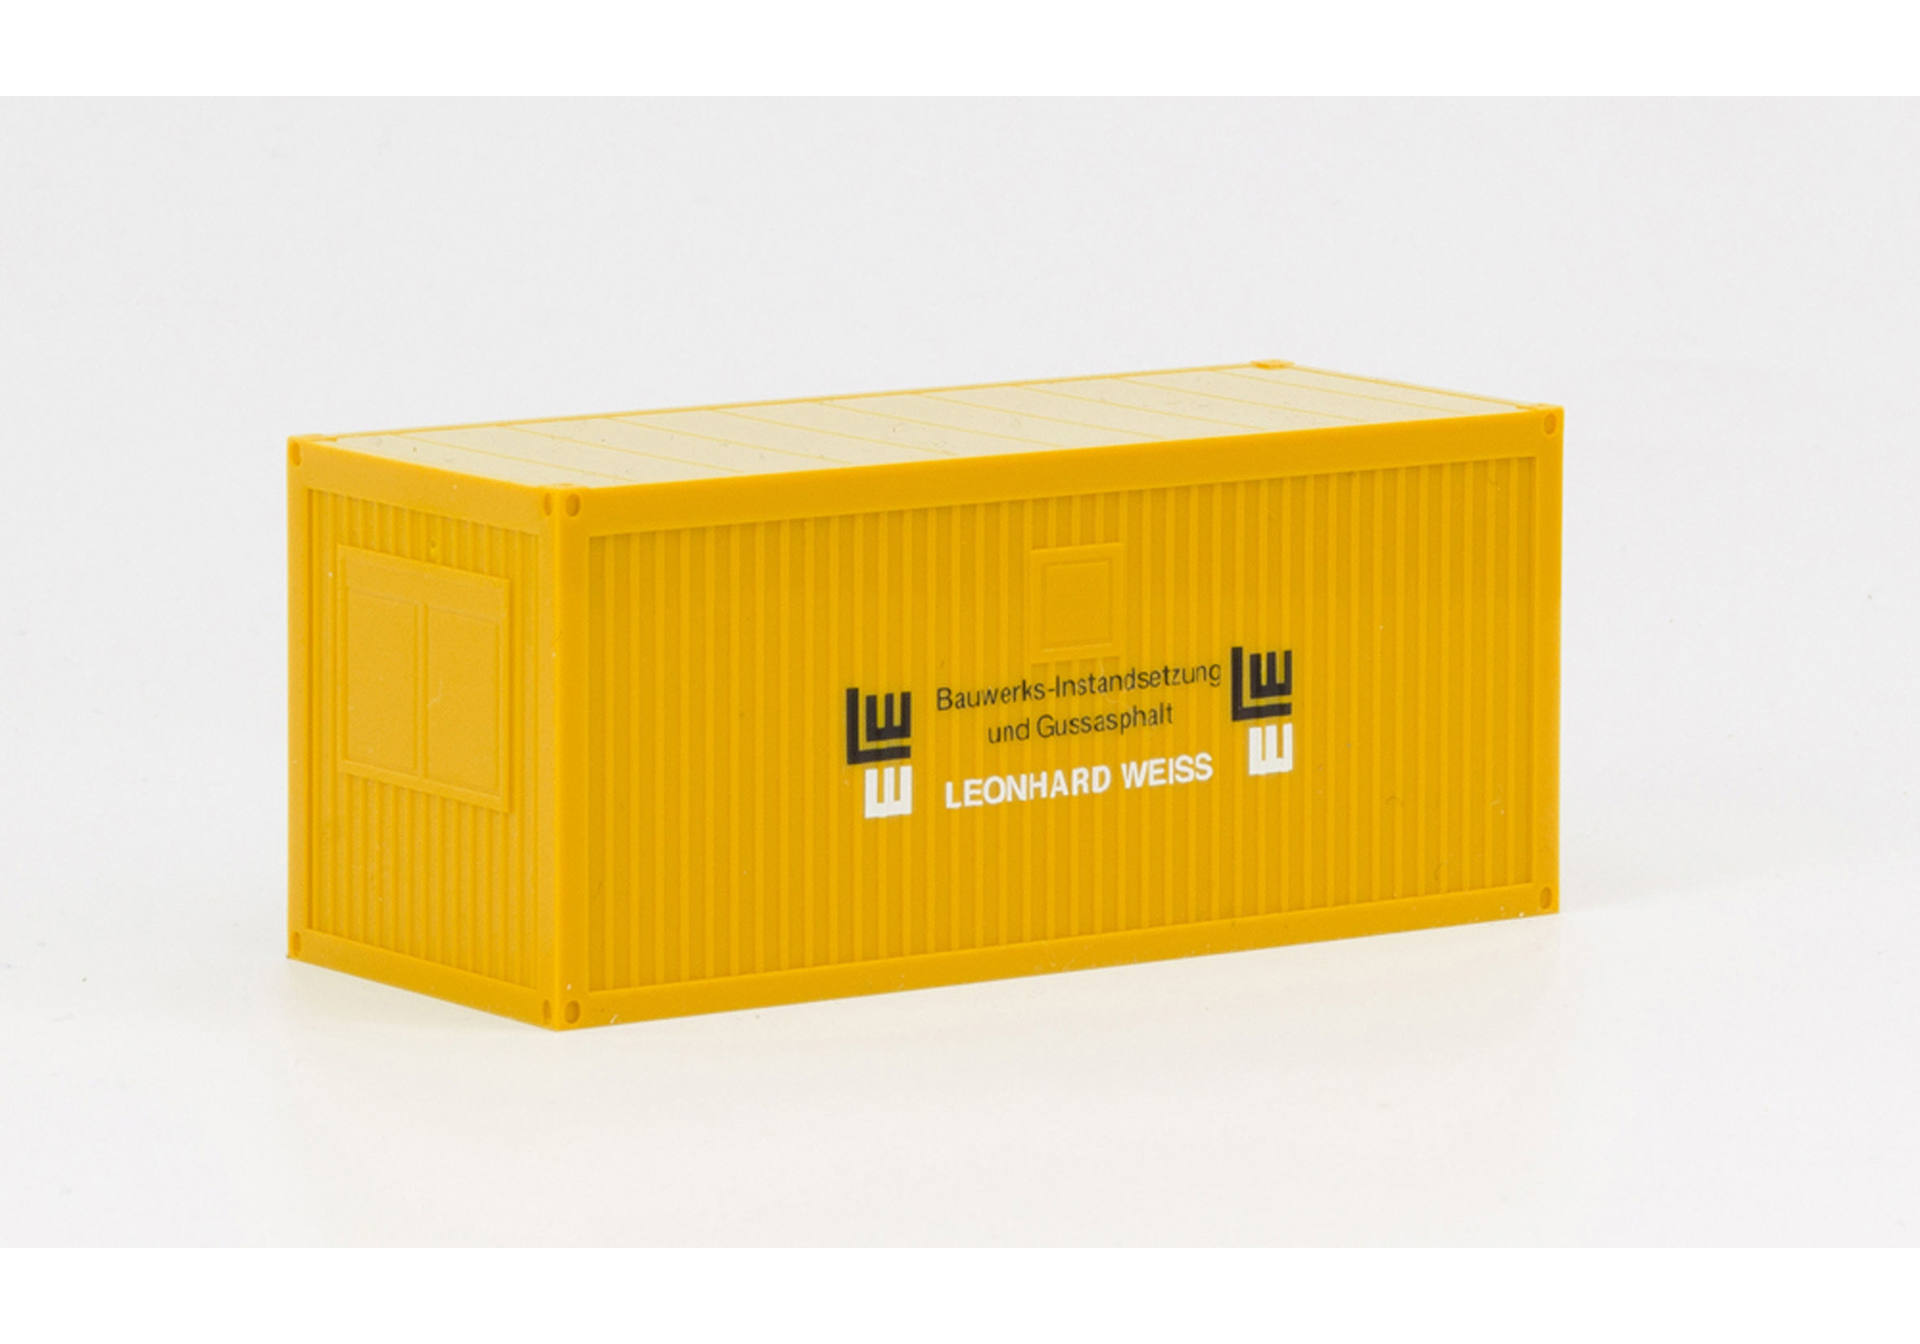 20ft. container "Leonhard Weiss" (Special Edition Baden-Württemberg)